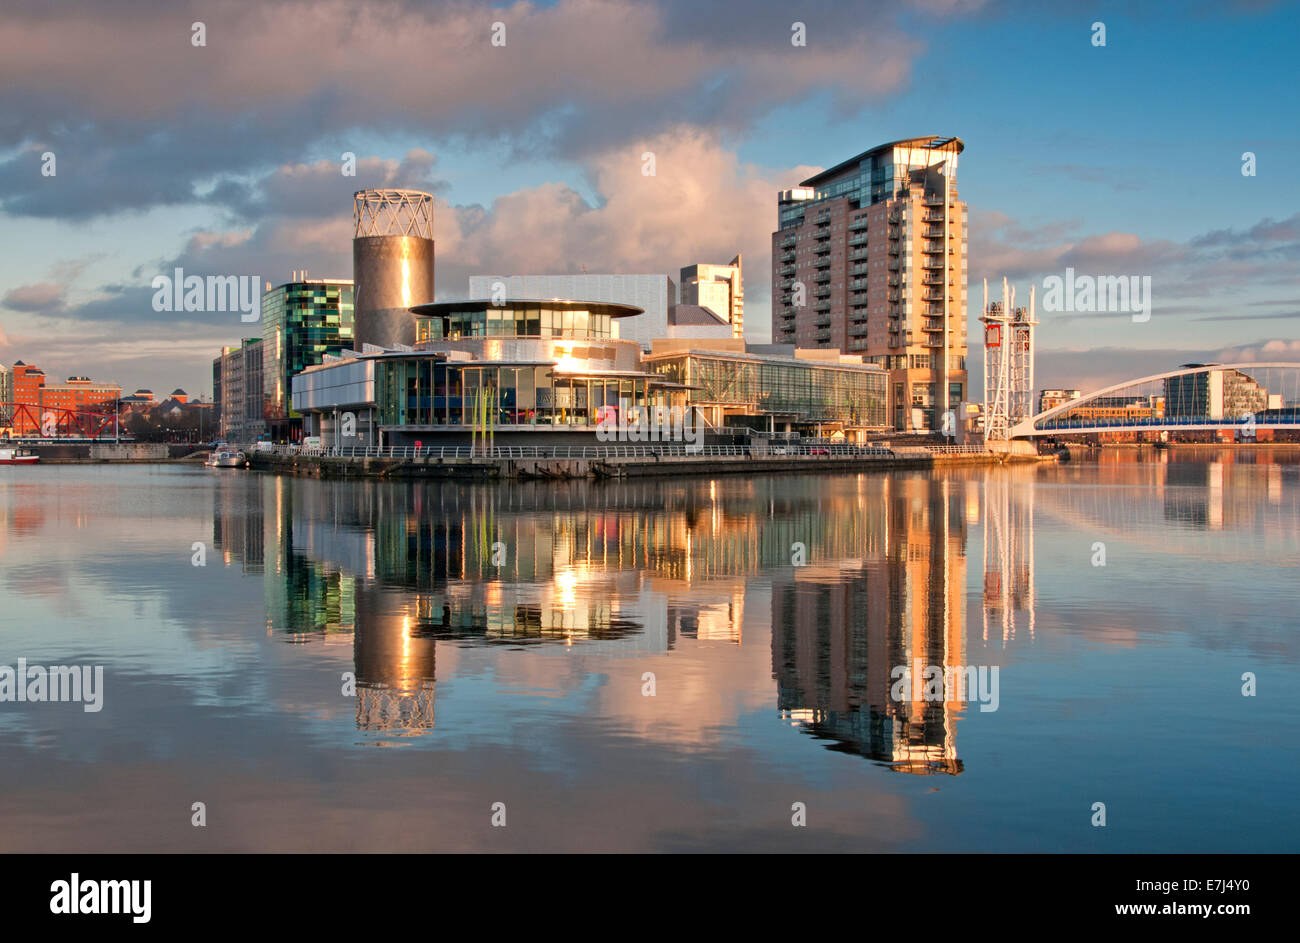 The Lowry Centre & Theatre, Salford Quays, Greater Manchester, England, UK Stock Photo